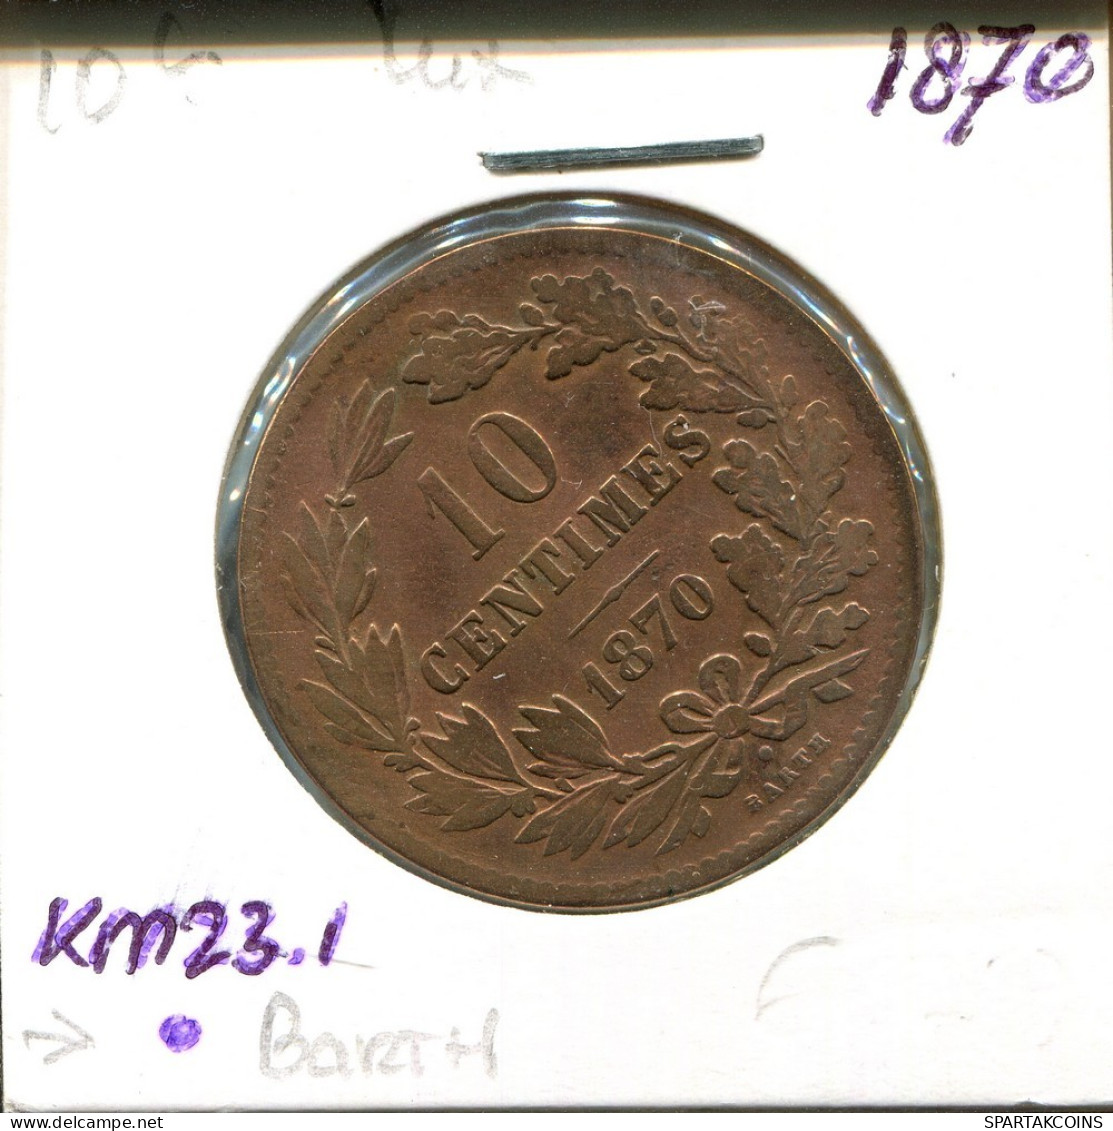 10 CENTIMES 1870 LUXEMBURG LUXEMBOURG Münze #AT180.D.A - Luxemburg